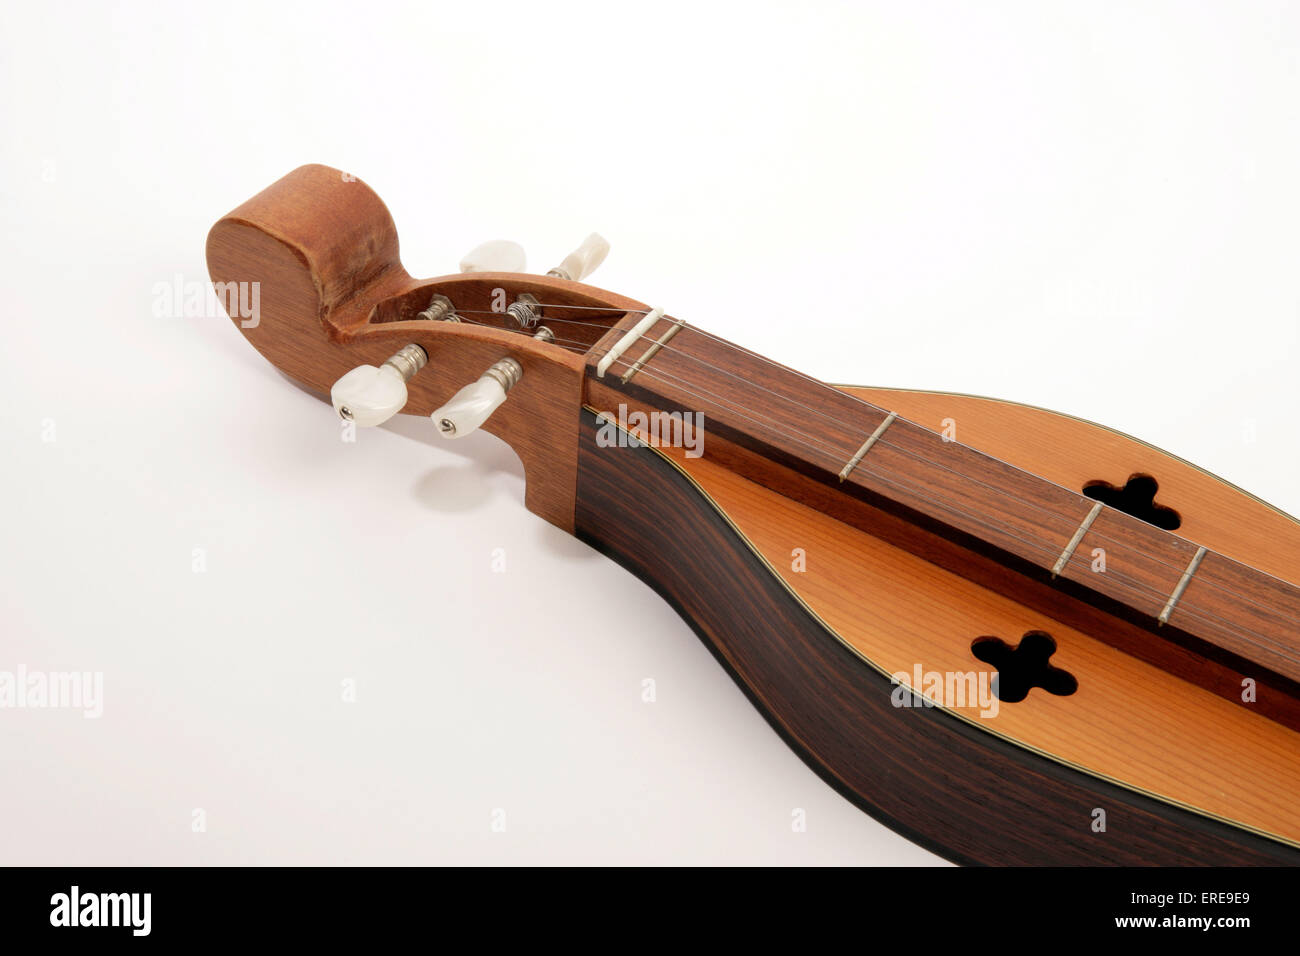 4 string Appalachian Dulcimer, also known as Mountain Dulcimer or mountain zither. Close up detail of strings and tuning pegs Stock Photo